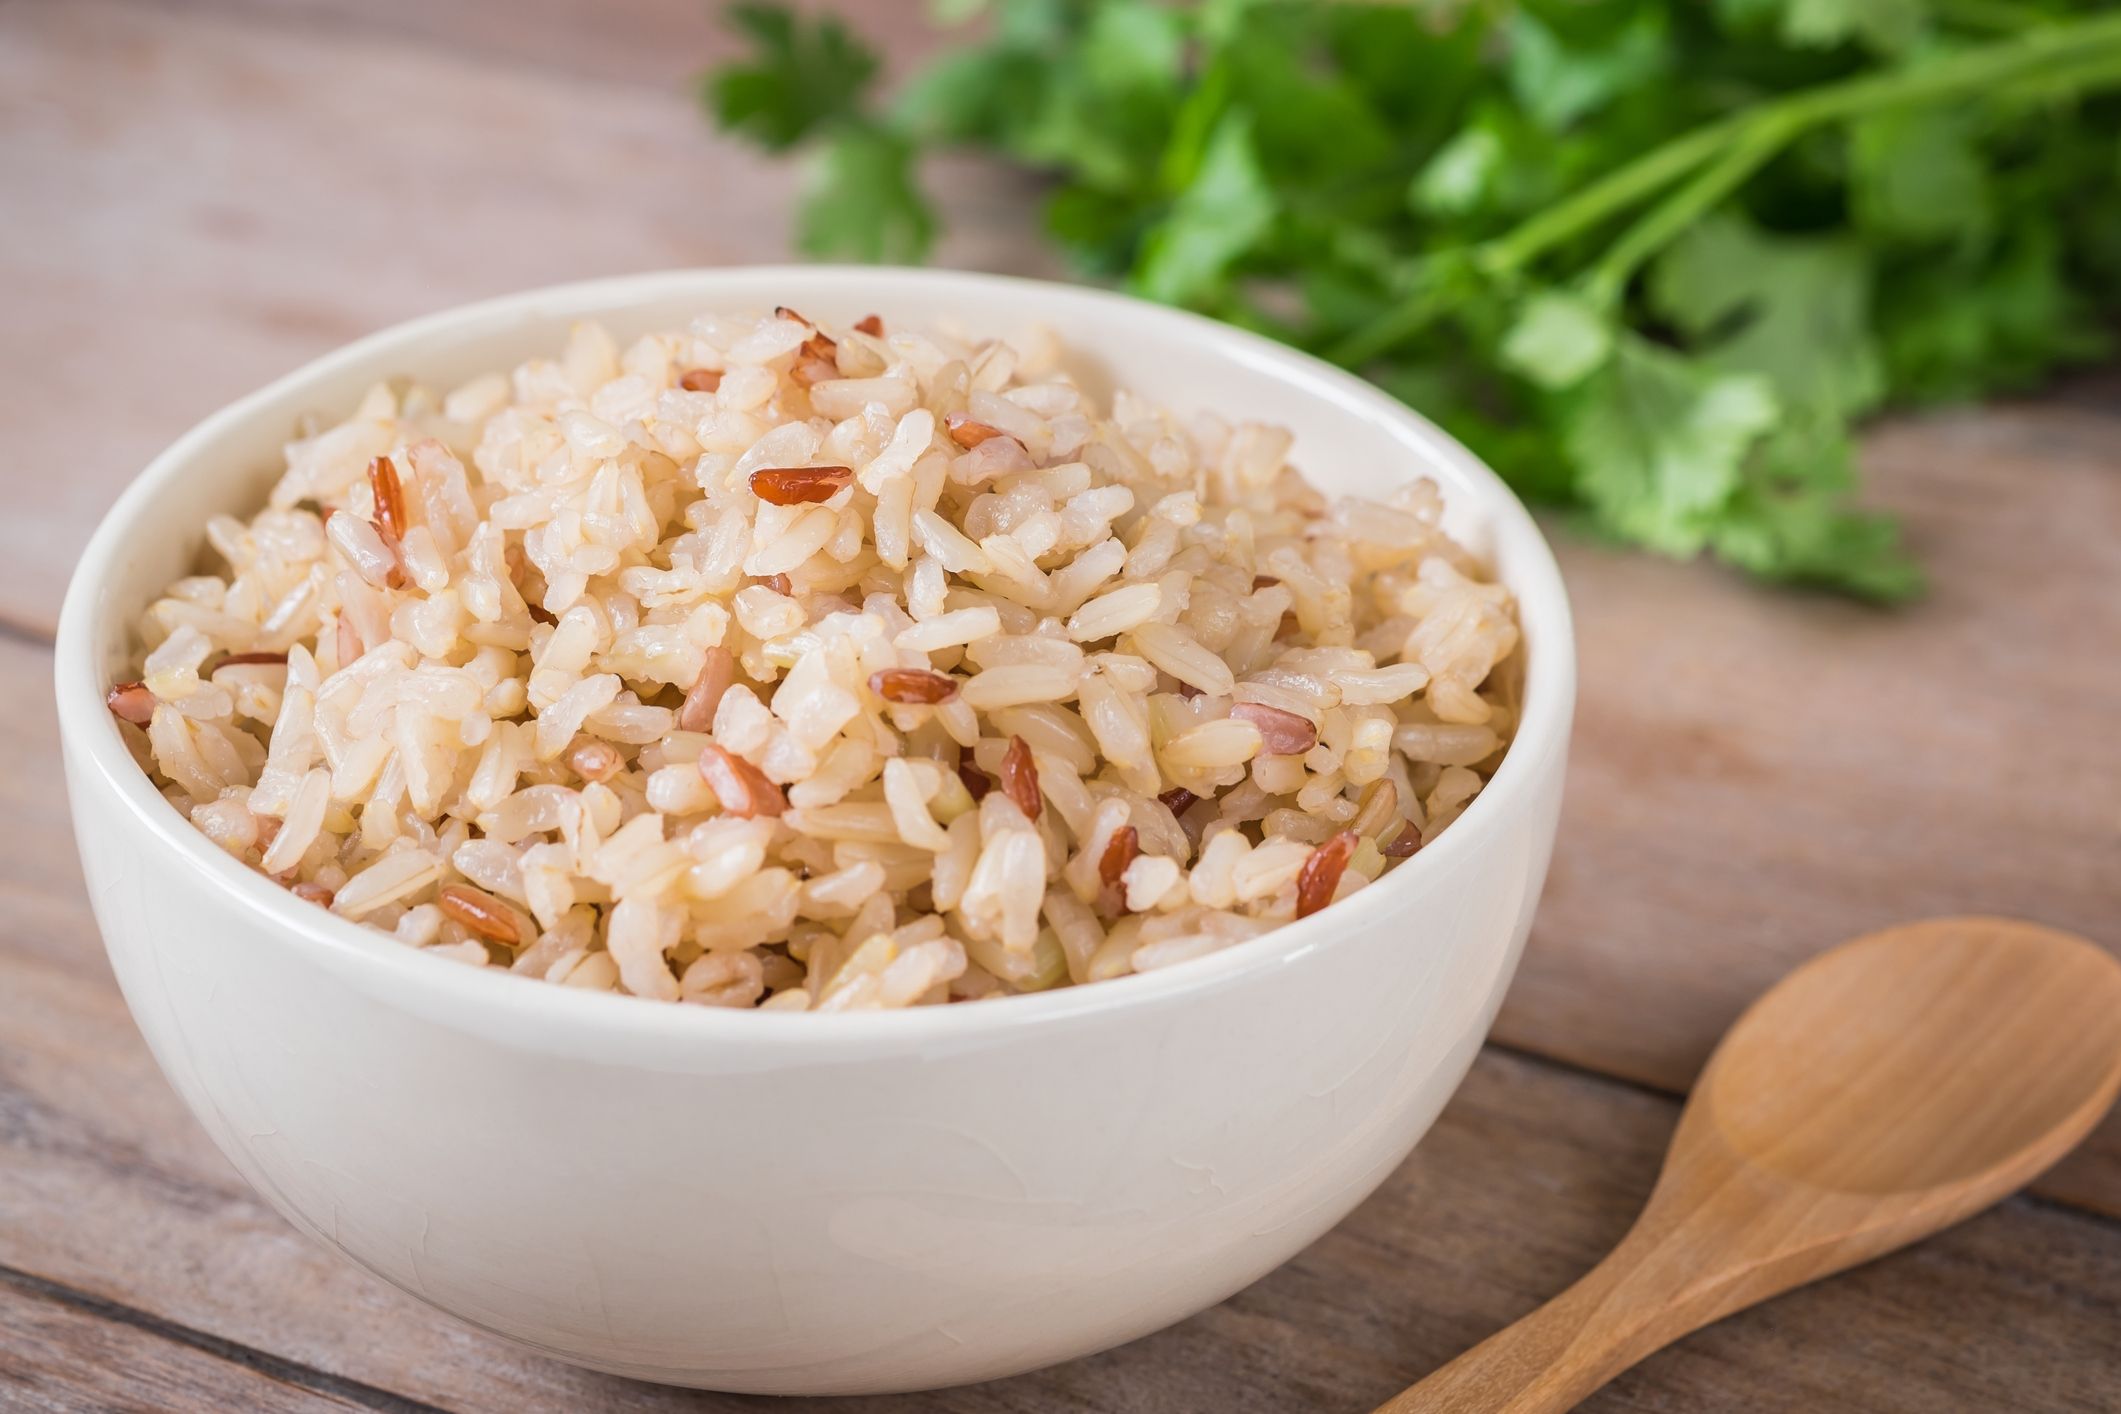 How to Cook Perfect Brown Rice in the Le Creuset Rice Pot 